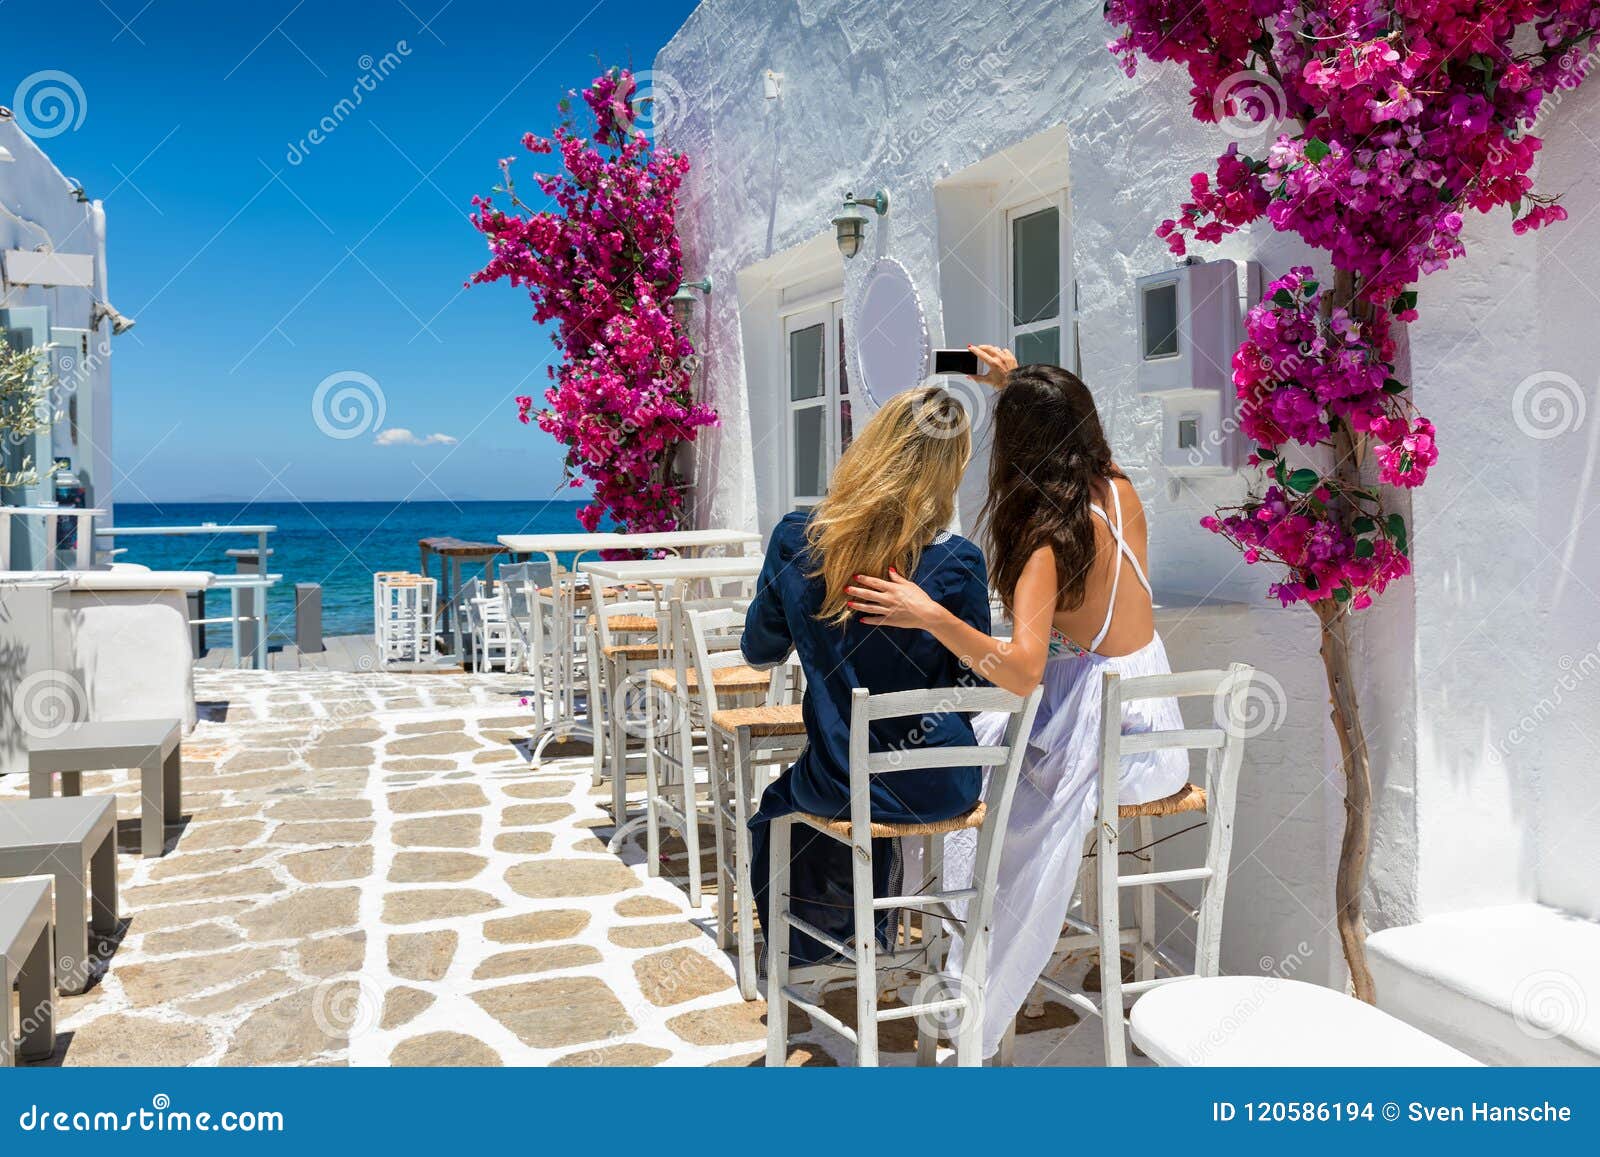 female tourists are taking a selfie photo in the whitewashed alleys of naousa village on paros